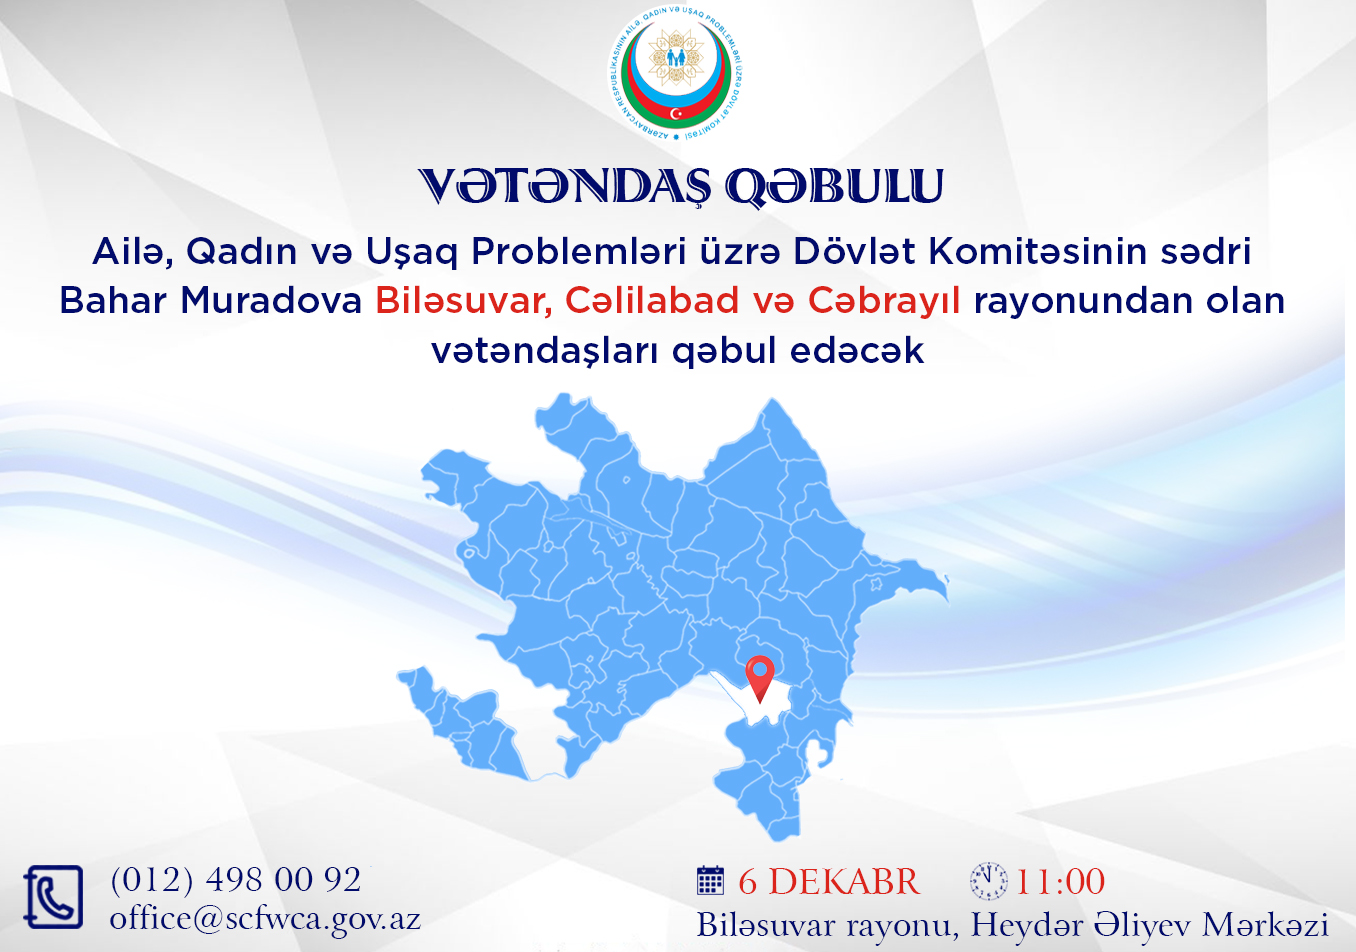 Mrs. Bahar Muradova, the Chair of the State Committee  will receive citizens in the Bilasuvar region